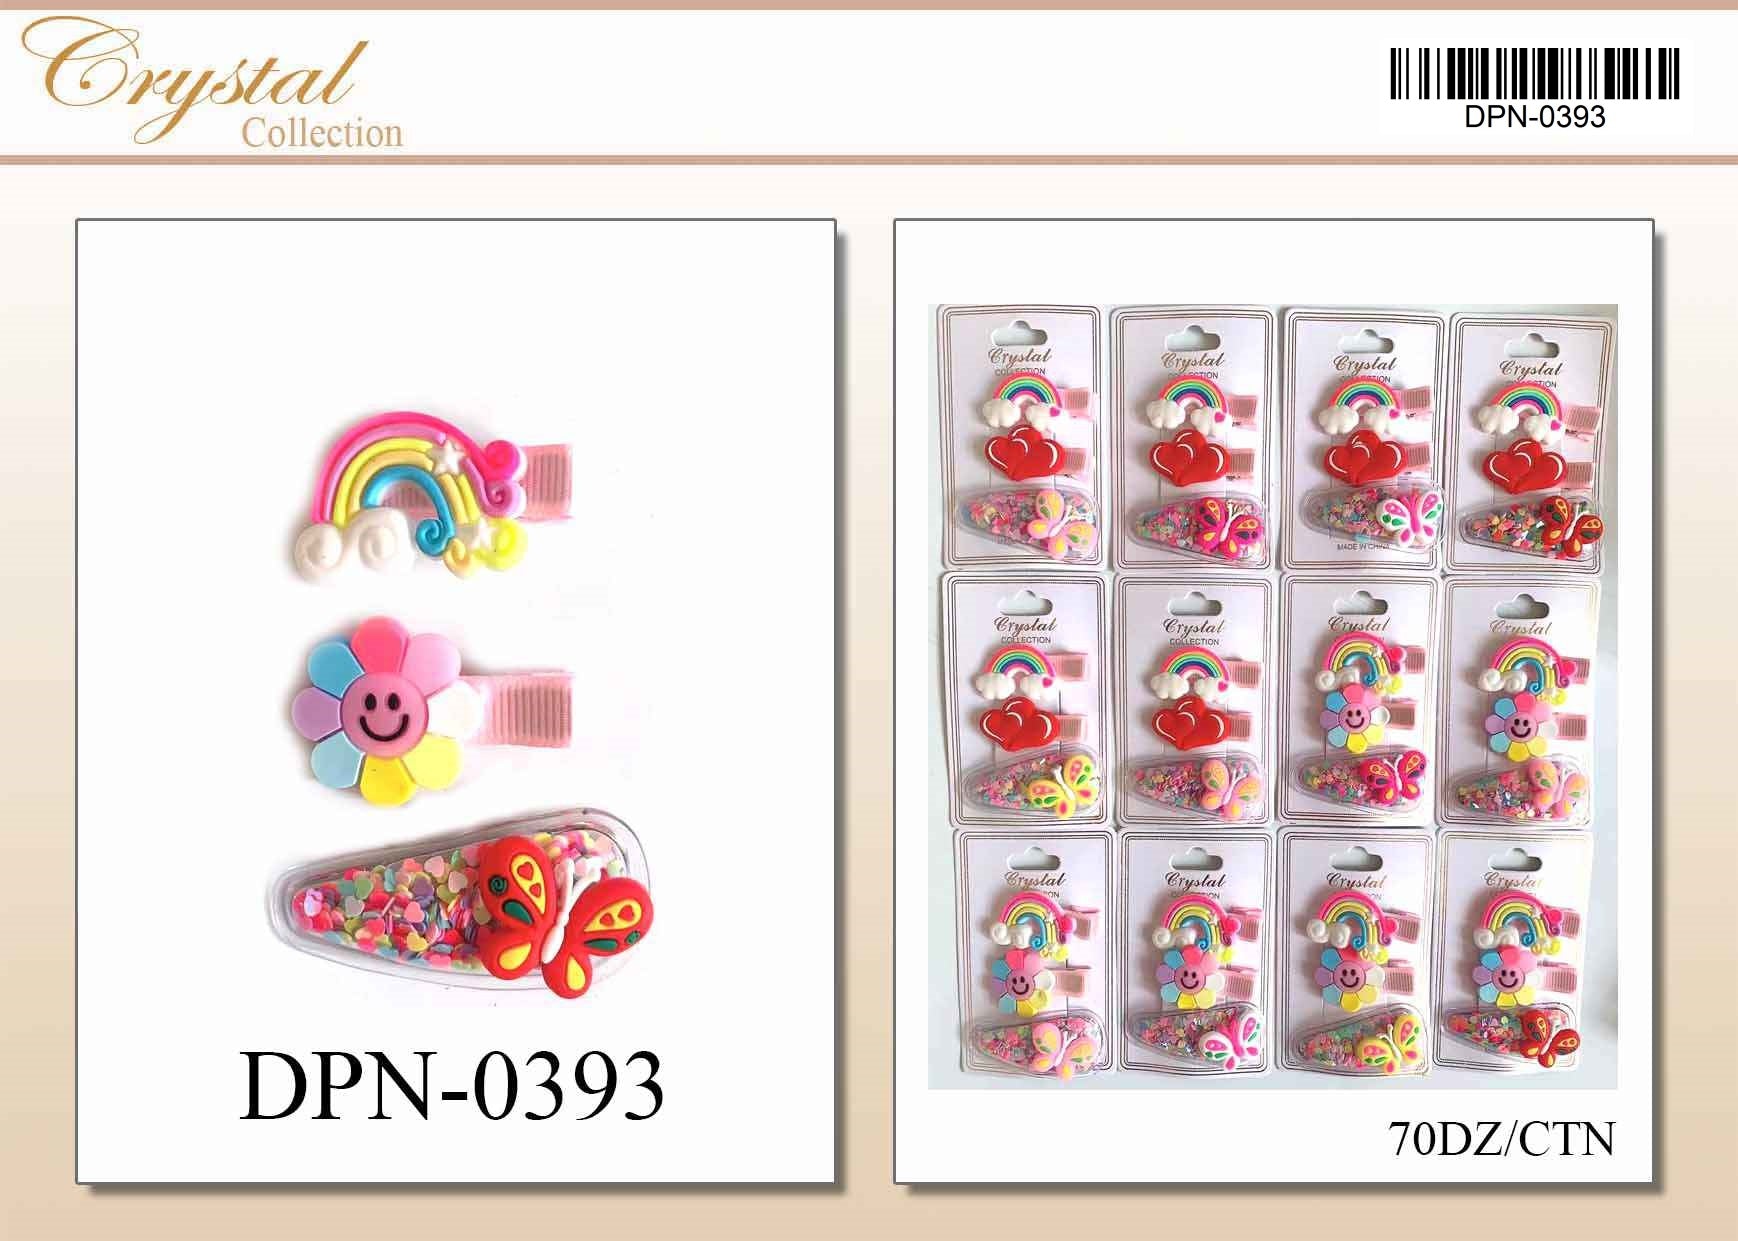 Small Hairclips For Kids #DPN0393 - Assort (12PC)